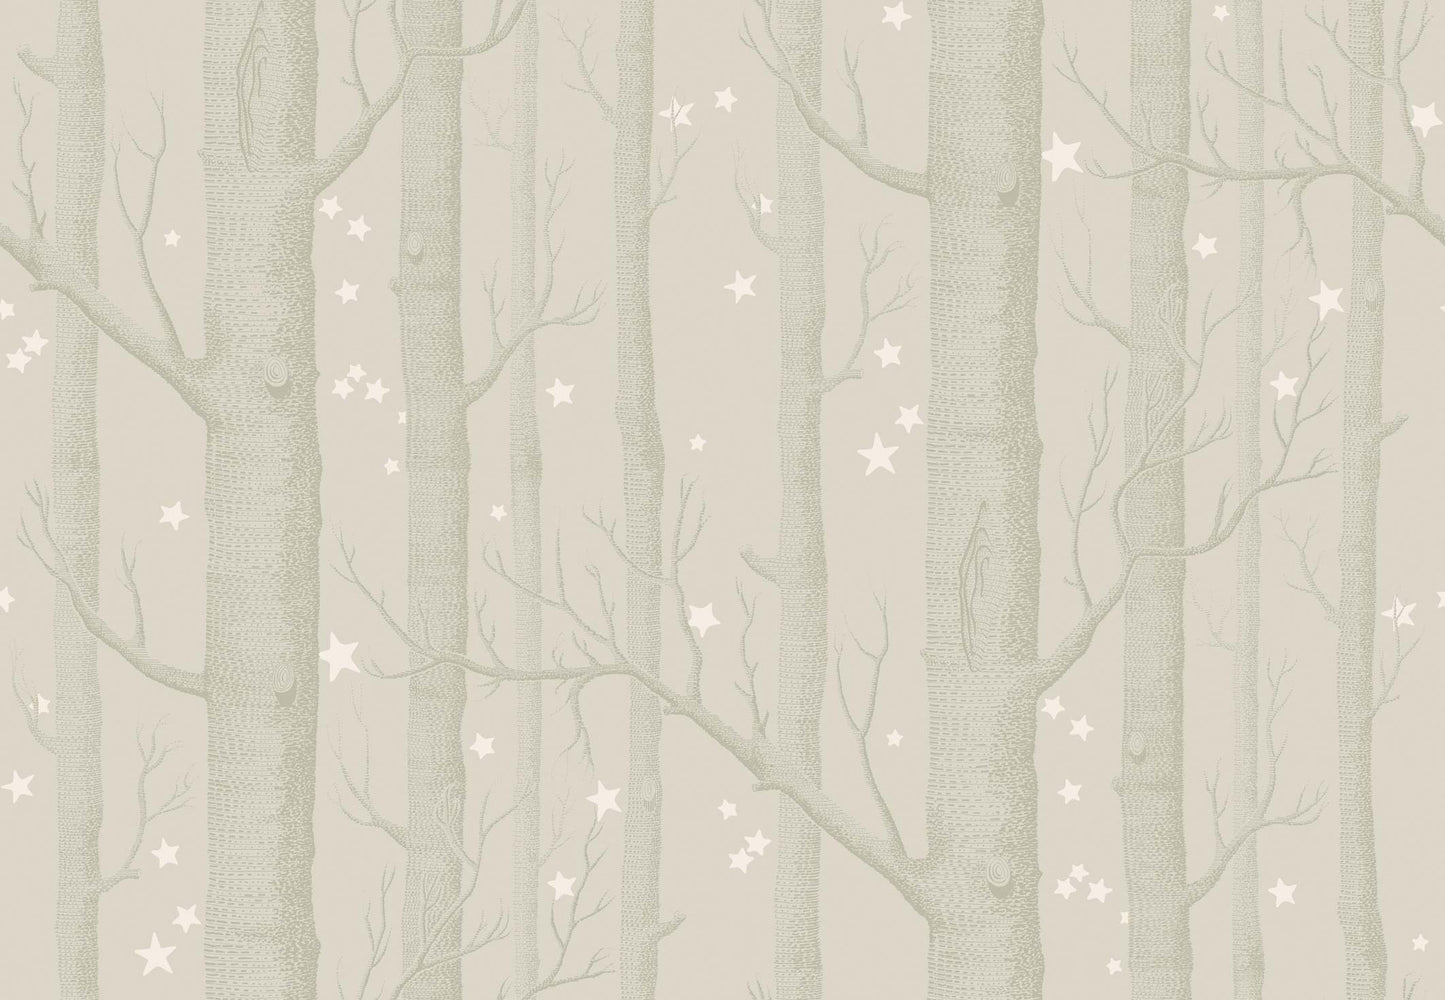 Cole and Son Woods & Stars wallpaper in Grey from The Whimsical Collection (103/11048) By combining two Cole & Son classics, we have produced the charming and enigmatic Woods & Stars paper. Woods and Stars ushers you into the most fairy-tale of worlds.